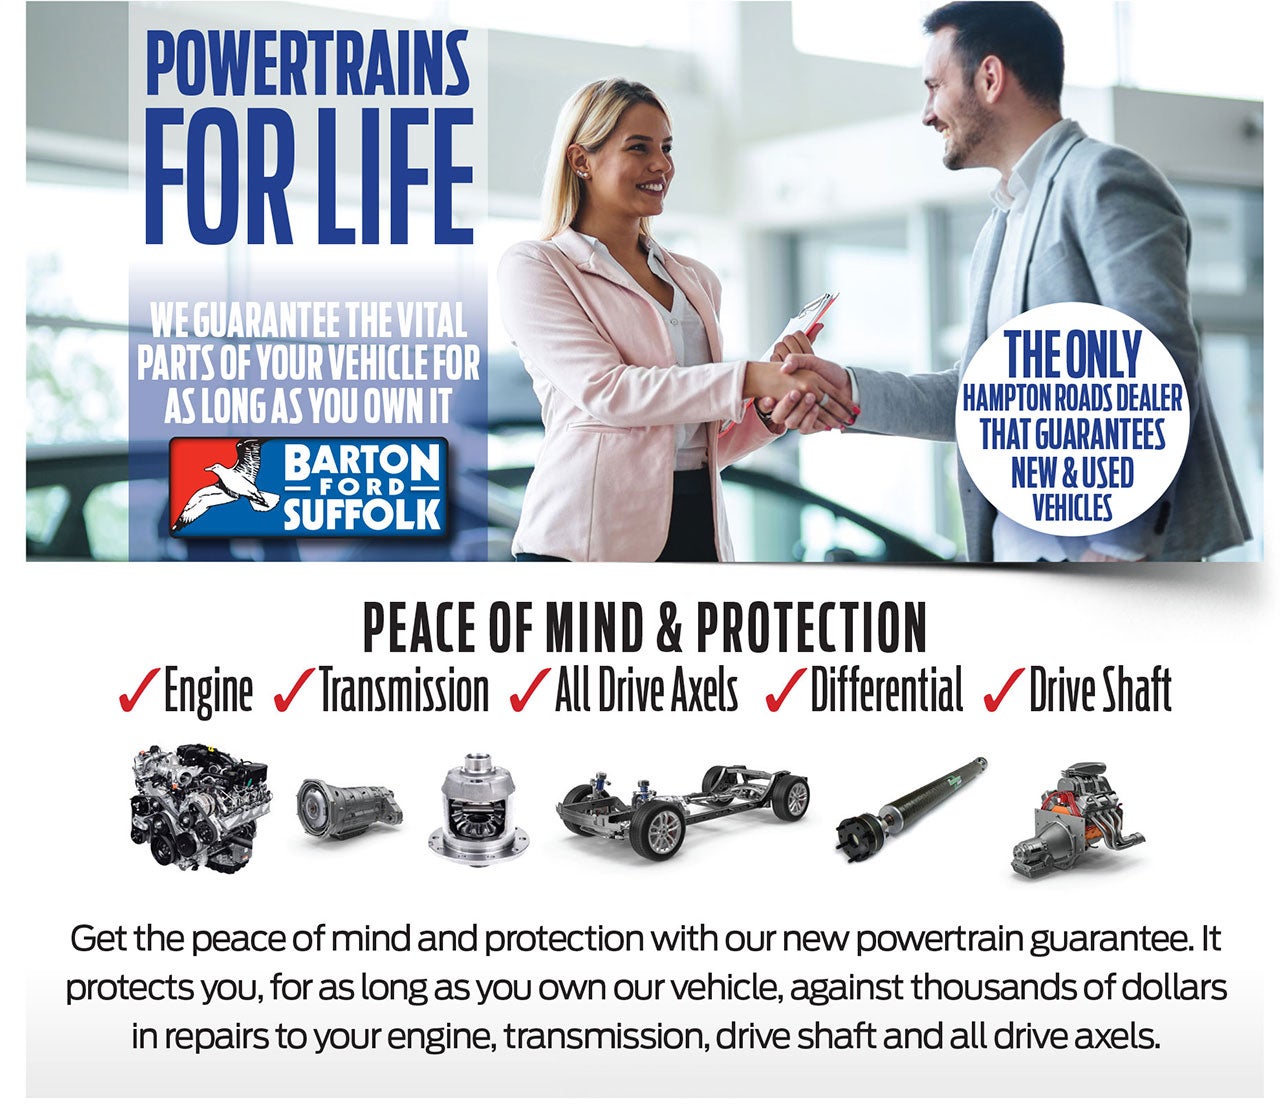 Powertrains for Life at Barton Ford in Suffolk VA